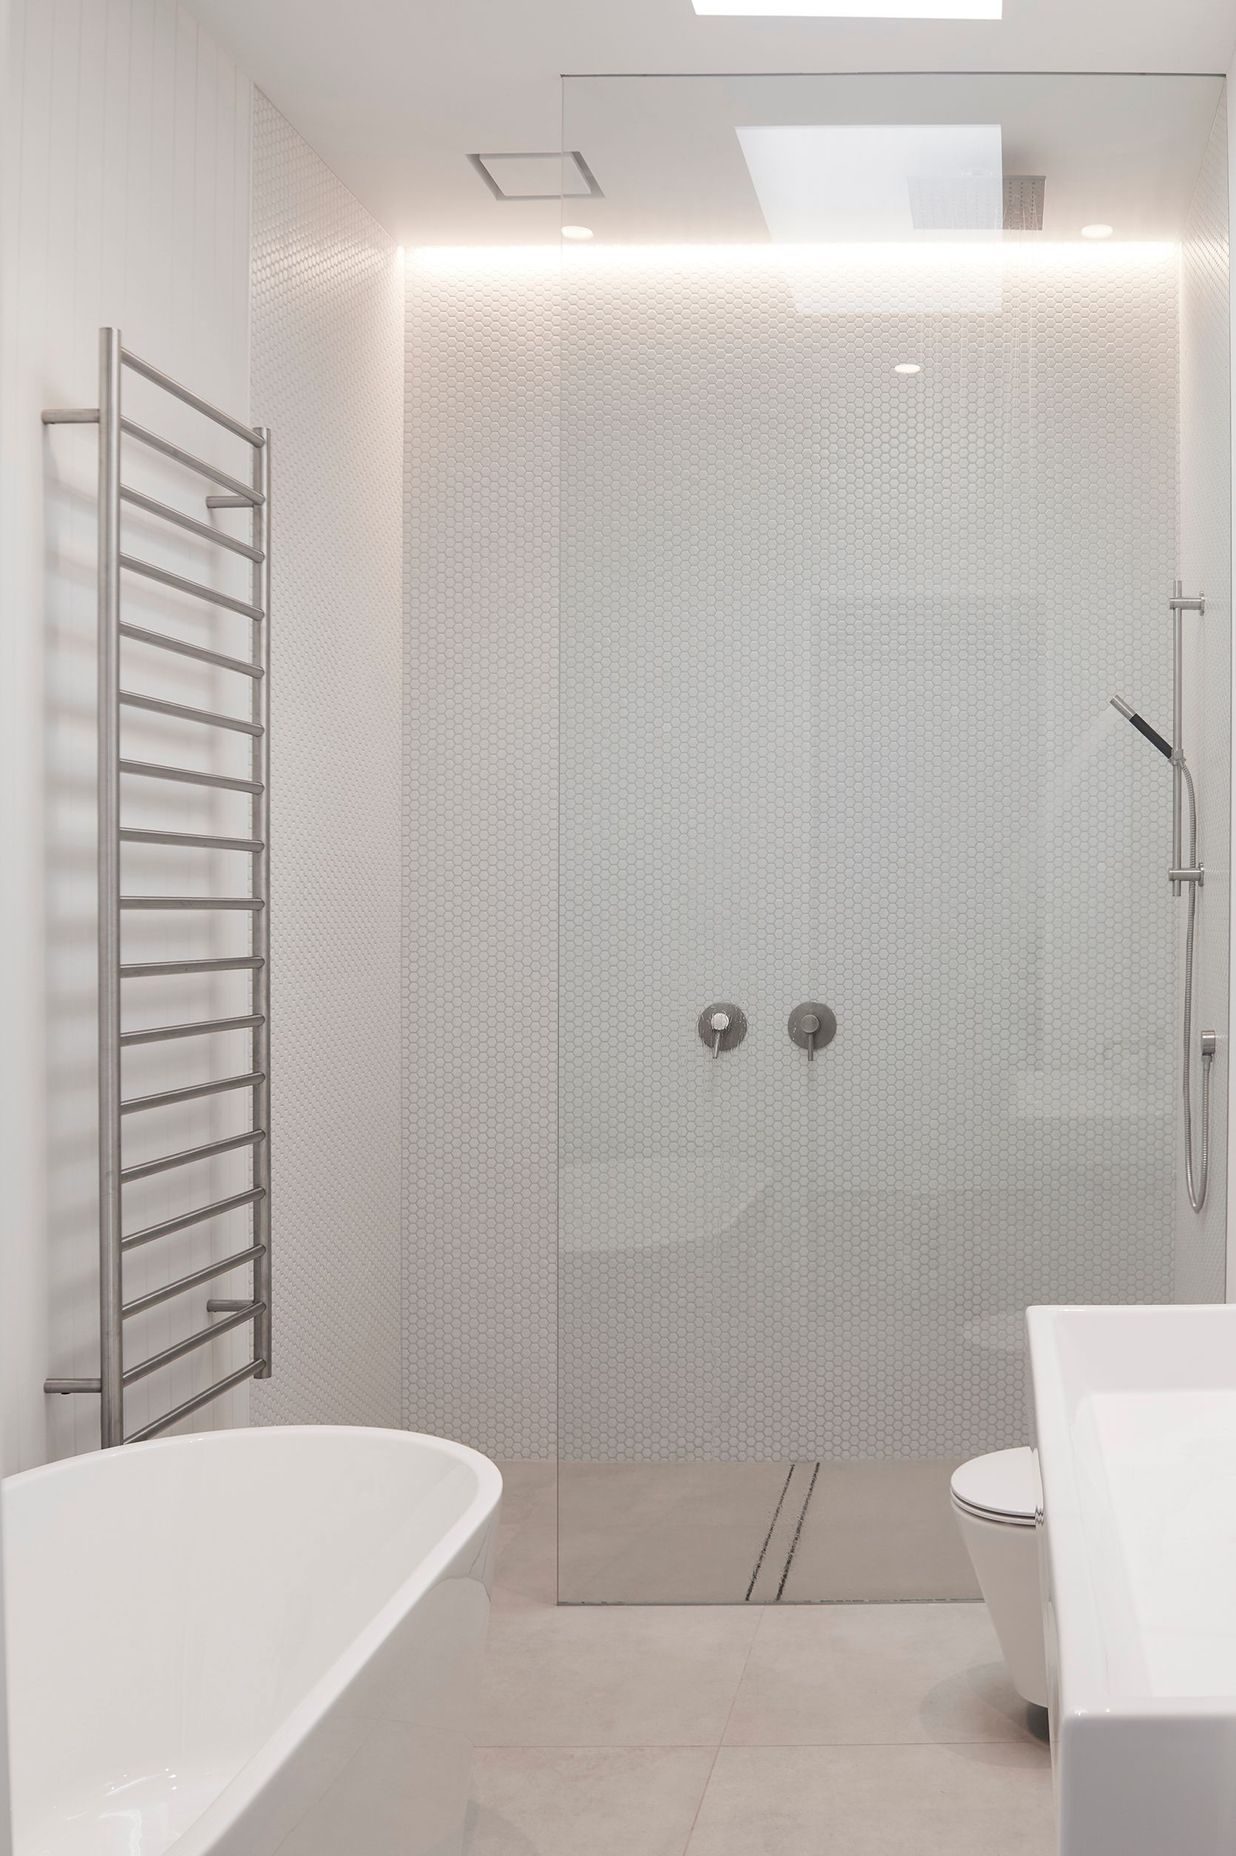 A monochromatic scheme was chosen for the bathrooms to impart a sense of pure simplicity.